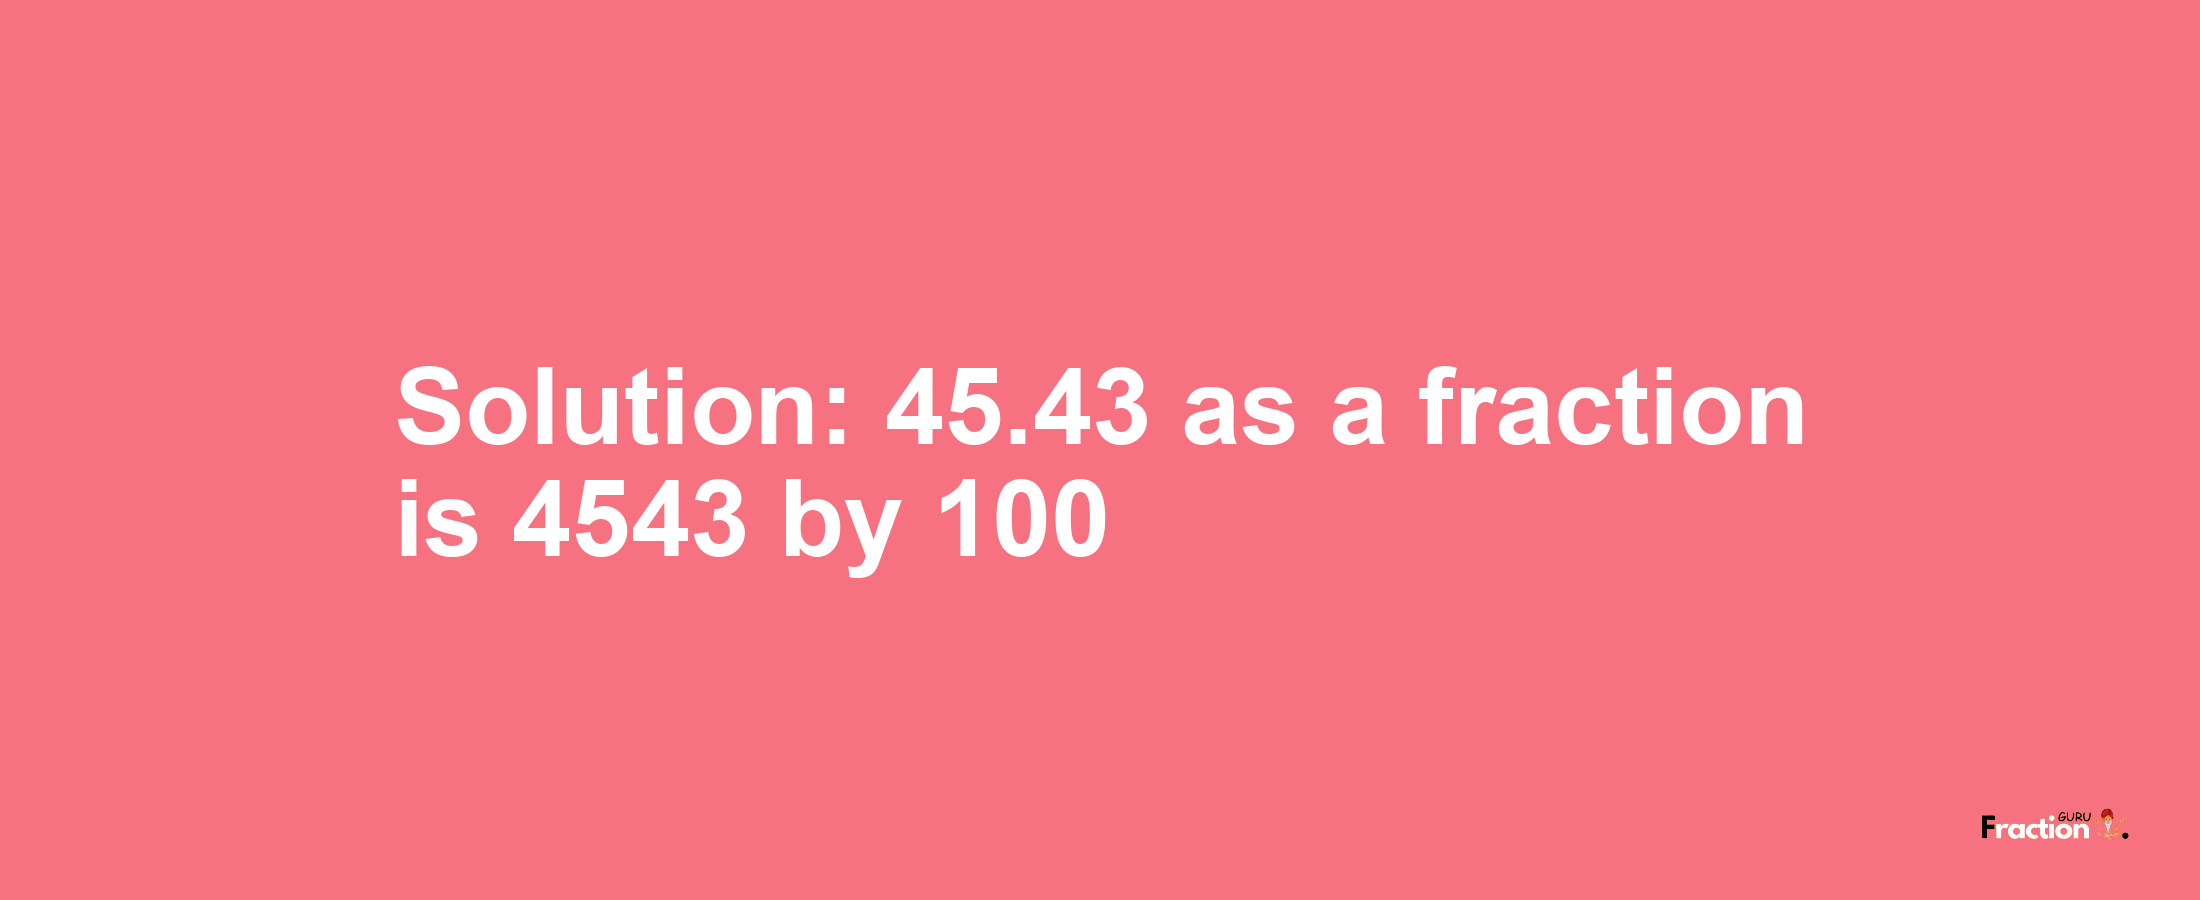 Solution:45.43 as a fraction is 4543/100